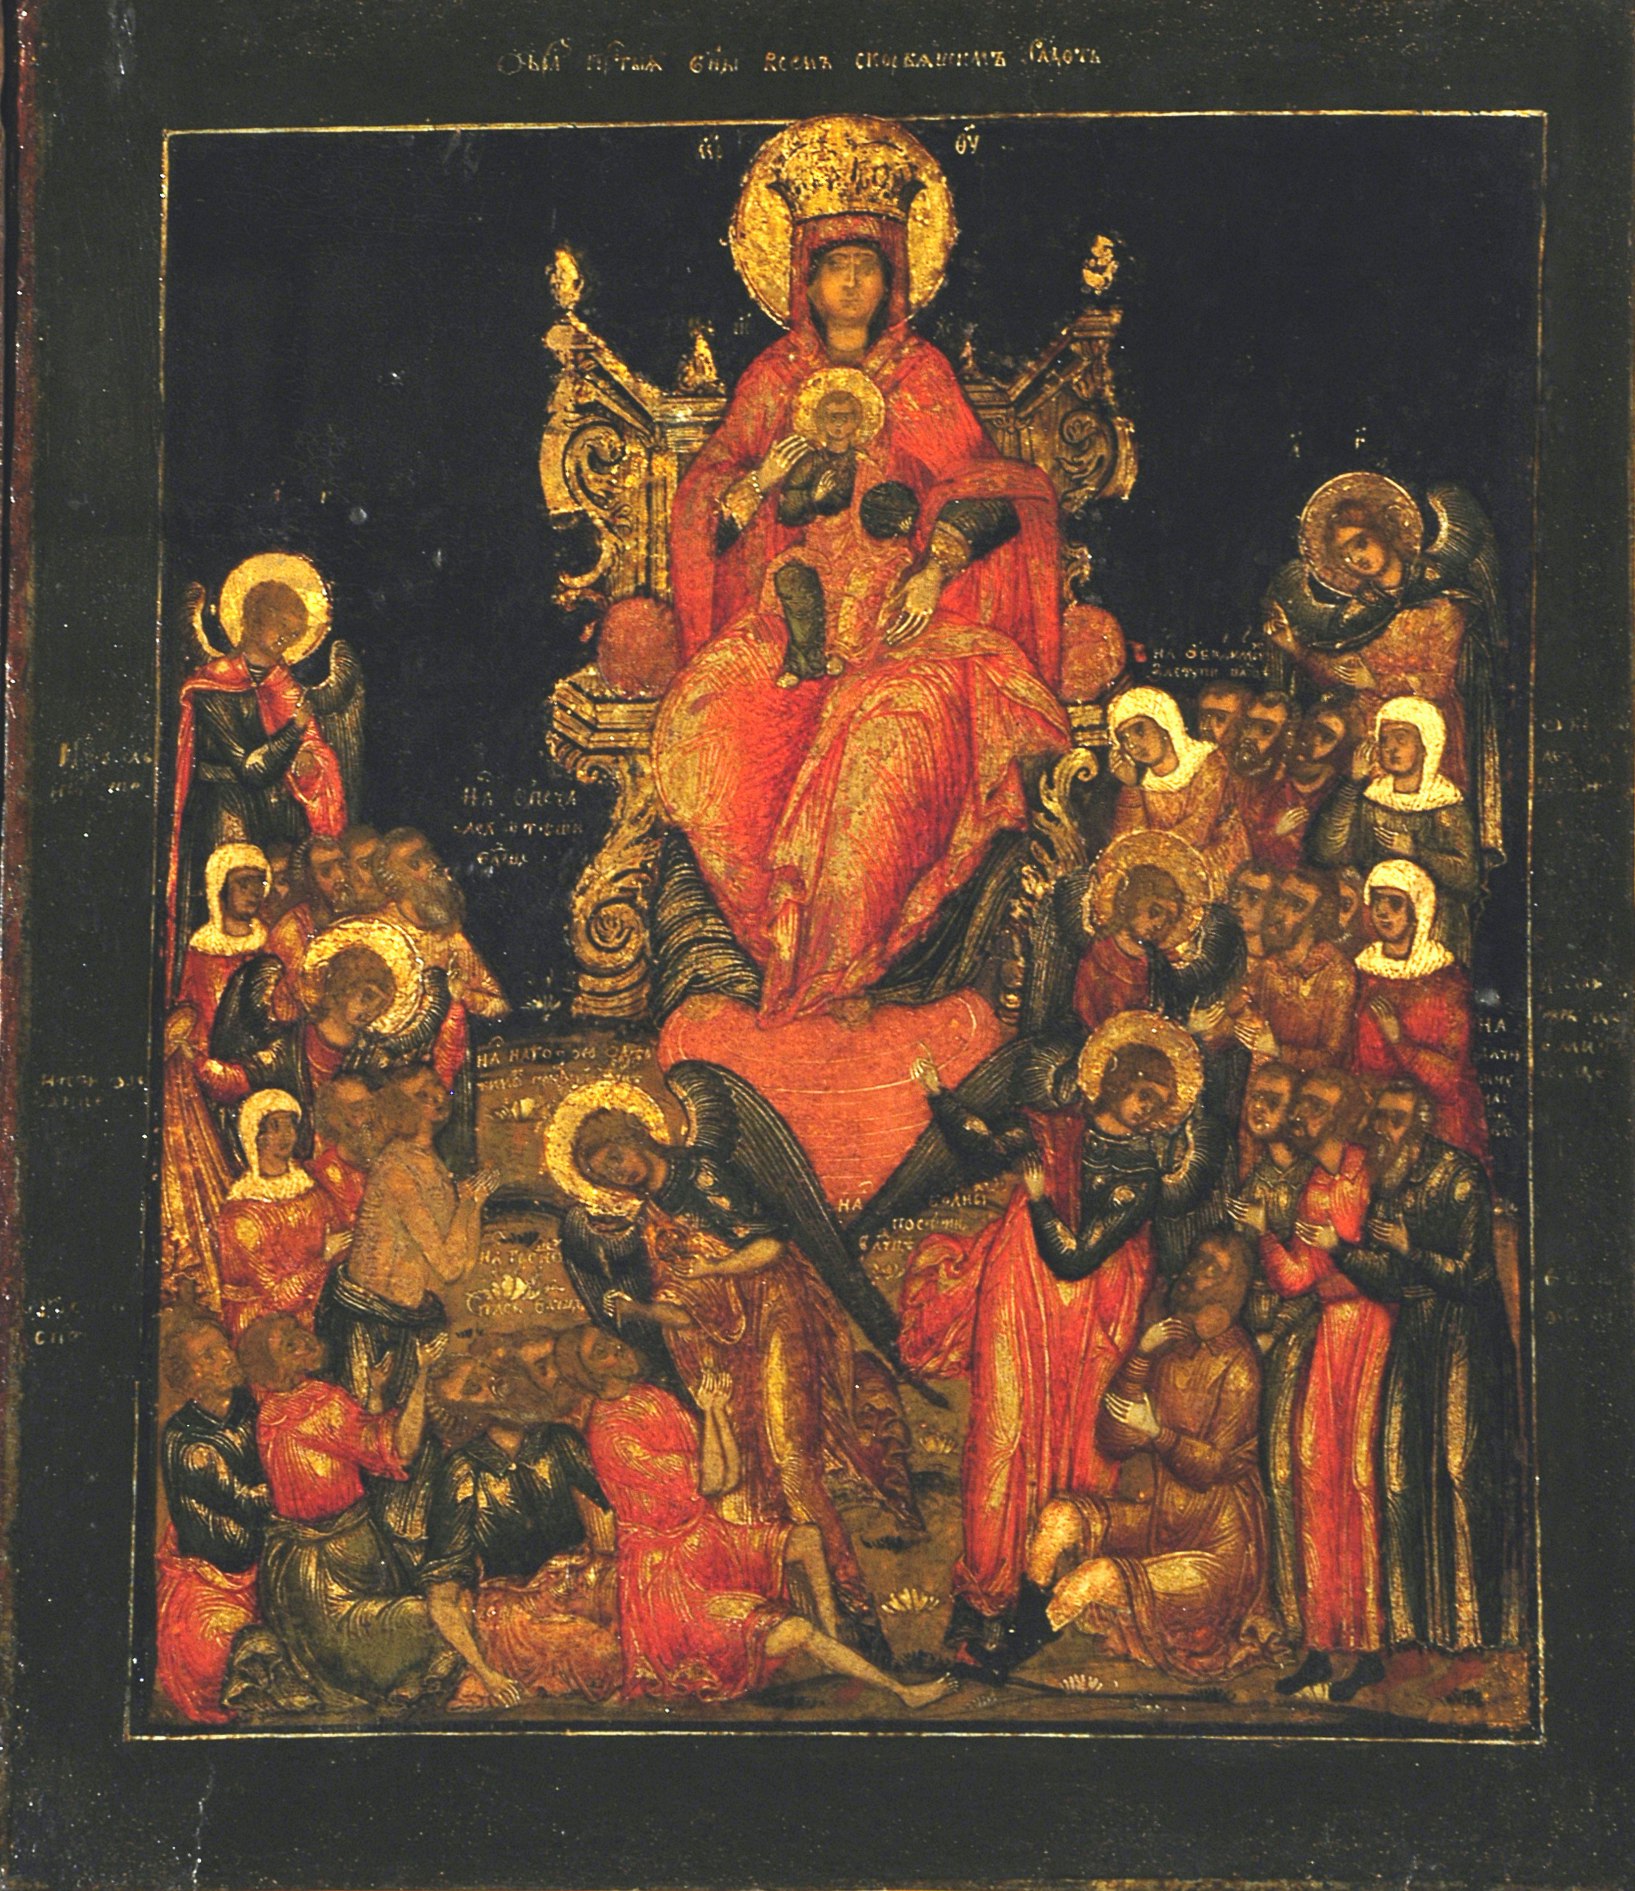 The Mother of God, Joy of all who sorrow (1890 no. 9367)